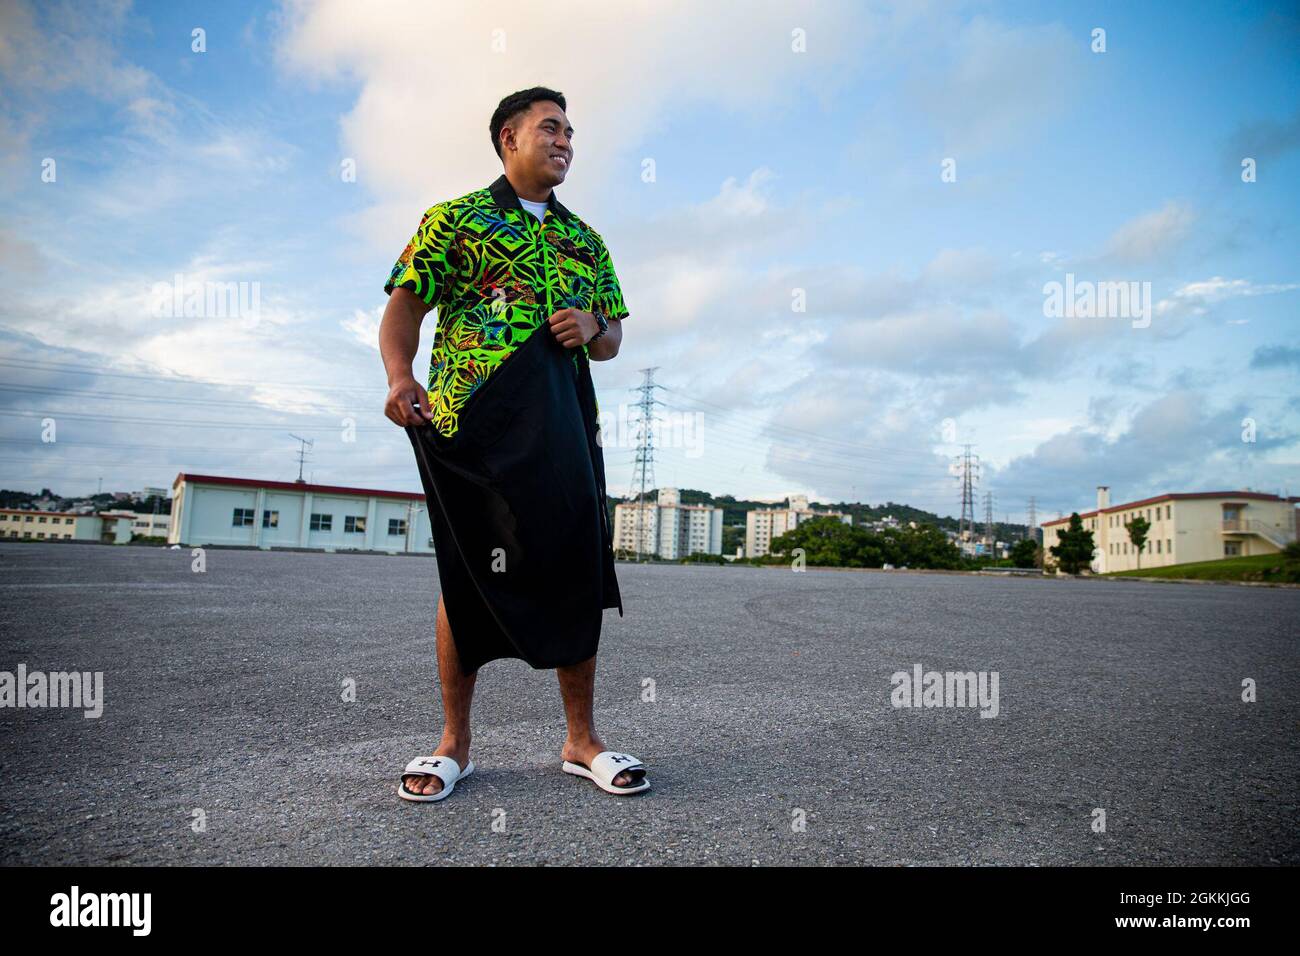 U.S. Marine Corps Cpl. Michael Auvaa, the inbound personnel first-stage noncommissioned officer-in-charge at the Installation Personnel Administration Center (IPAC), displays a lavalava, a traditional Samoan skirt on Camp Foster, Okinawa, Japan, May 18, 2021. The month of May represents and pays tribute to Asian-American and Pacific-Islander heritage, and recognizes the contribution and influences their cultures made which play an instrumental part in the past, present and future success of the United States of America. Auvaa grew up in A’asu, a village on the north coast of Tutuila Island, Am Stock Photo